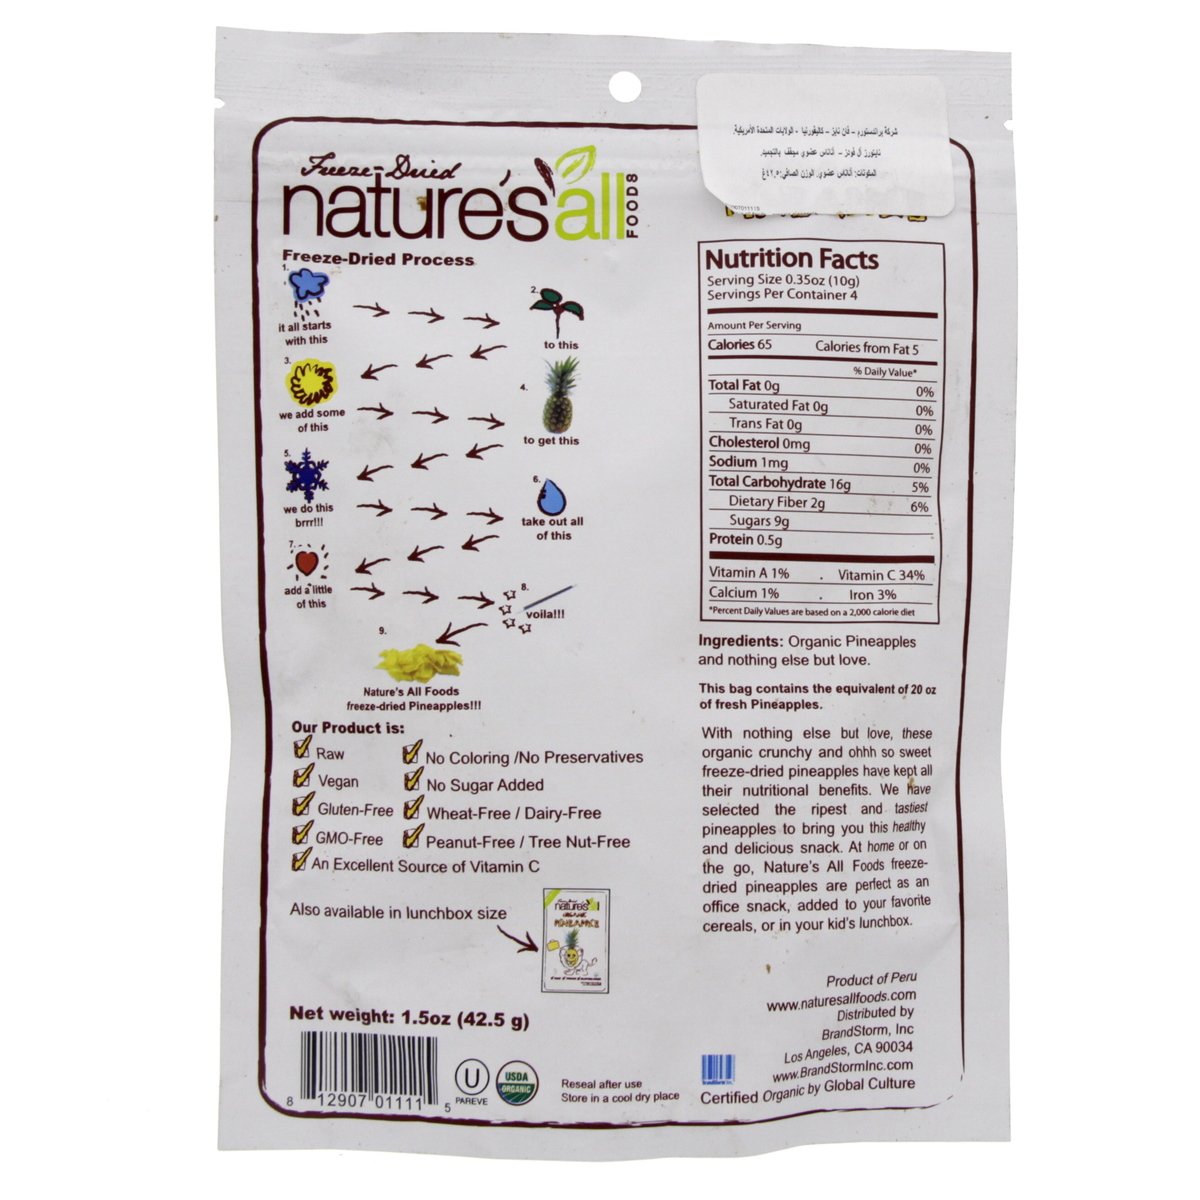 Natures All Organic Pineapple Freeze & Dried 42.5 g